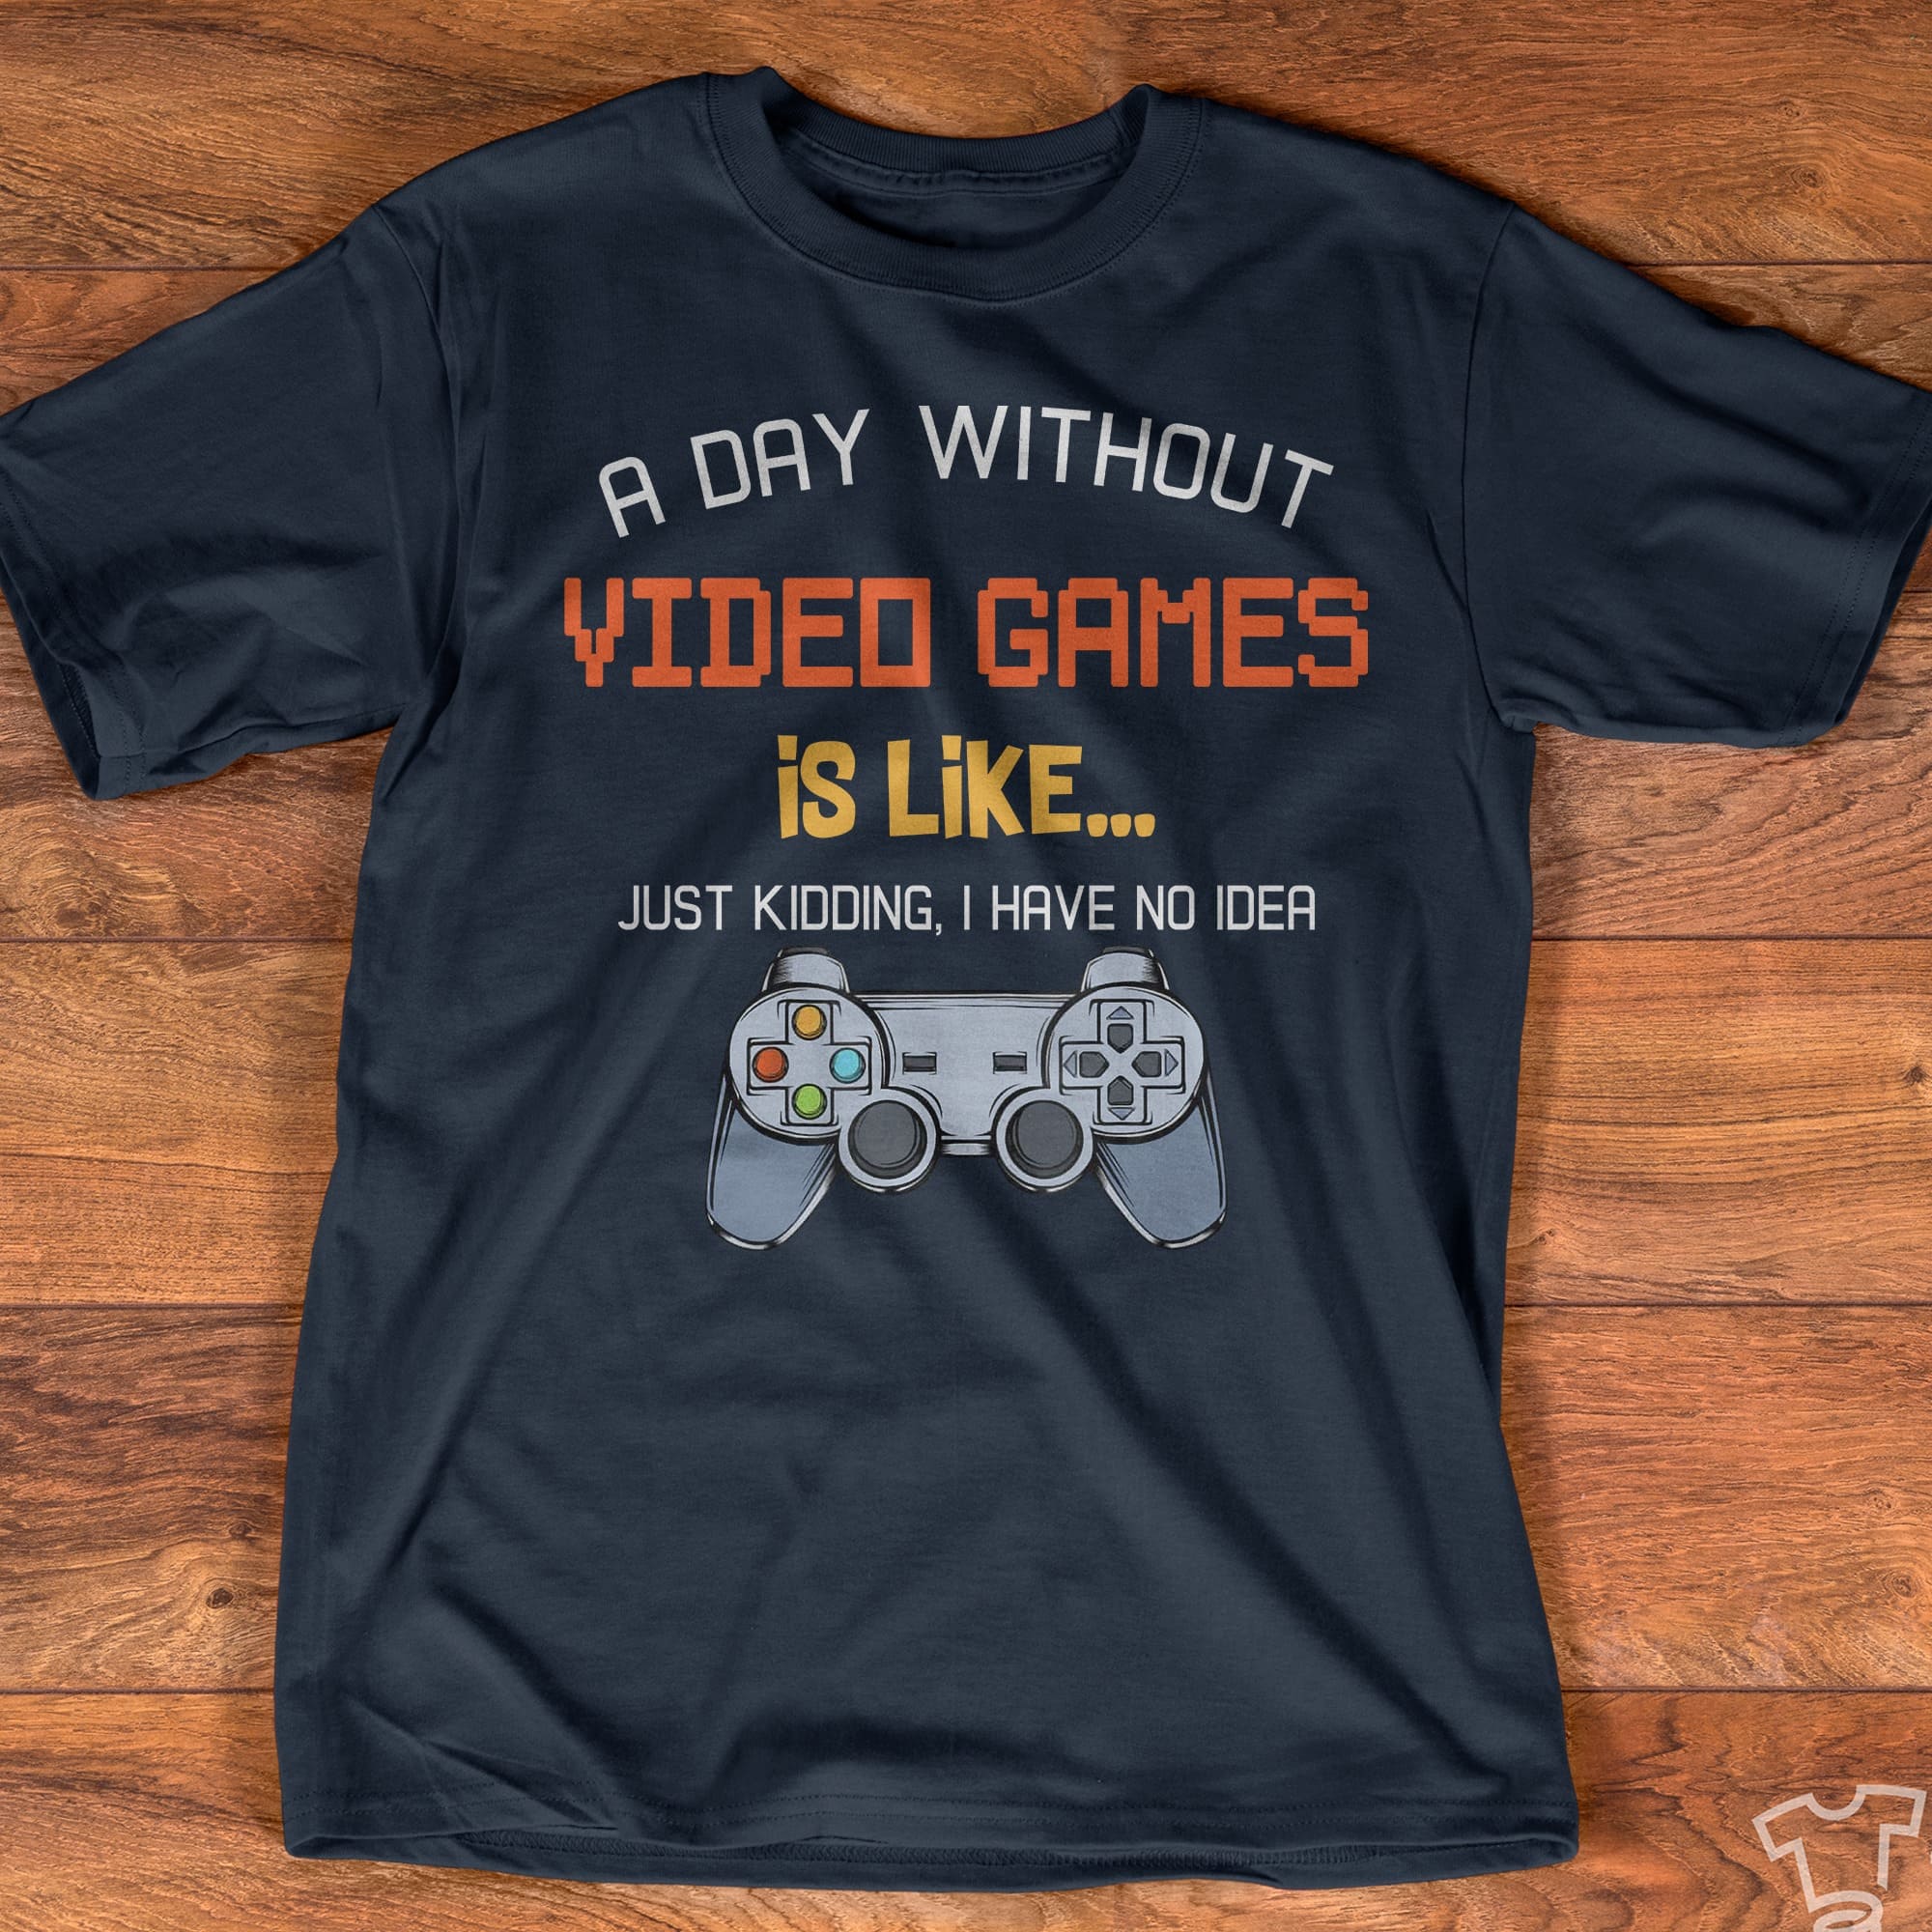 A day without video games is like - Gaming people gift, T-shirt for gamersA day without video games is like - Gaming people gift, T-shirt for gamers